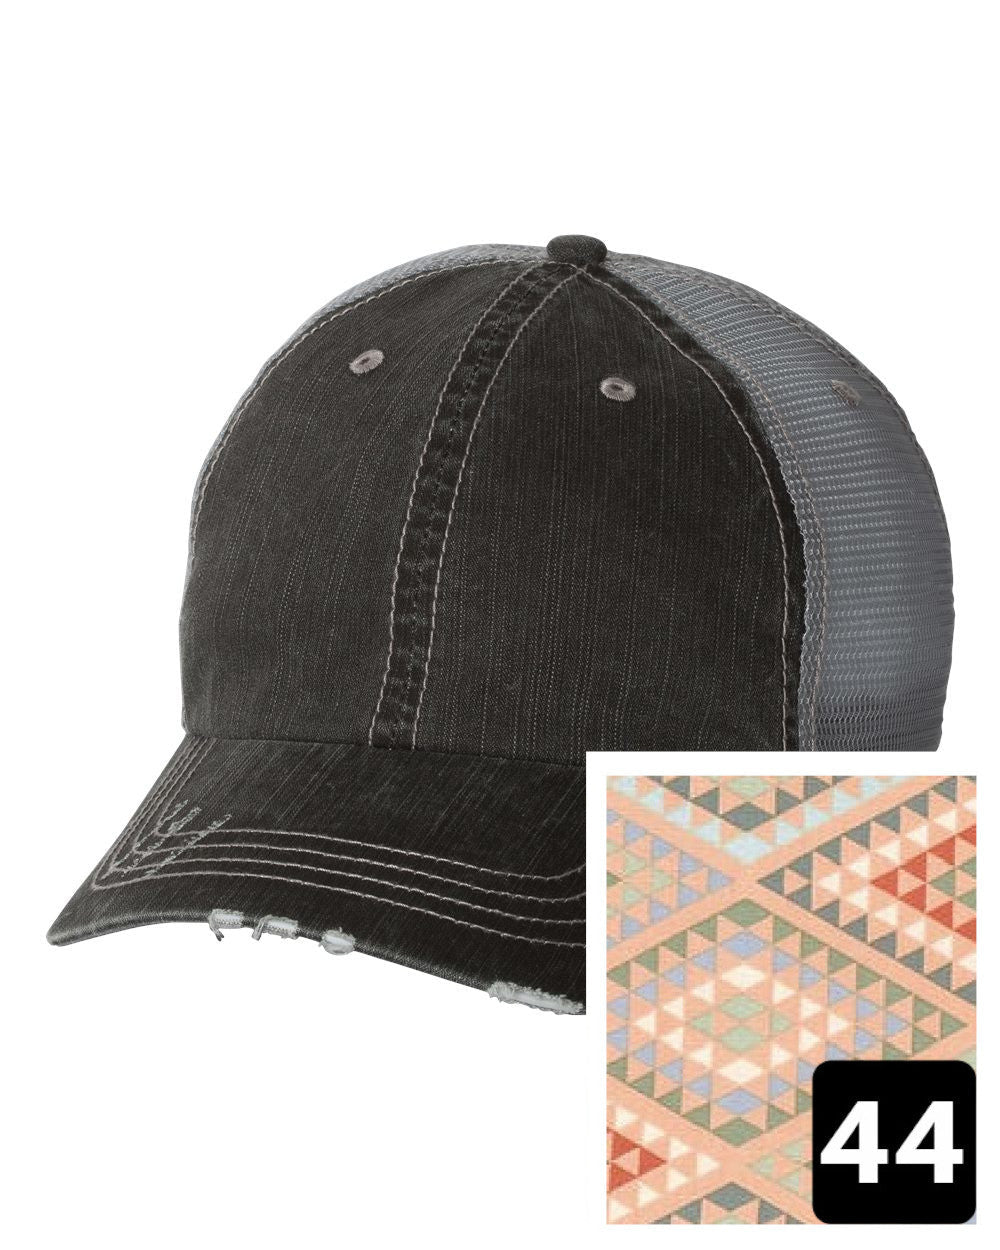 gray distressed trucker hat with navy coral and white chevron fabric state of Maryland